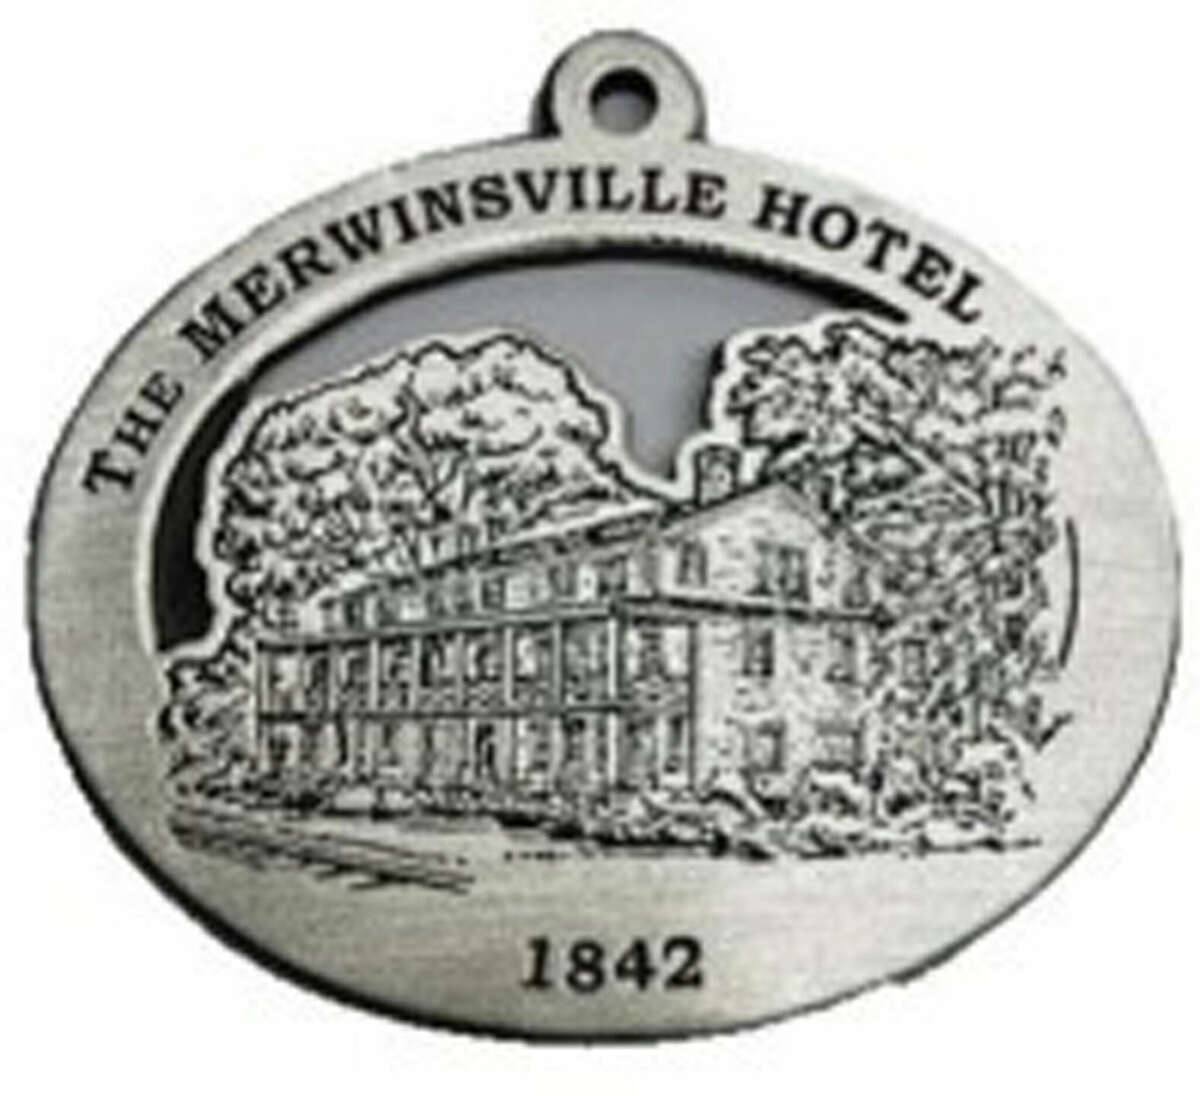 The New Milford Historical Society & Museum, located at 6 Aspetuck Avenue, is now offering its 2022 commemorative medallion for purchase as a fundraiser for the museum.